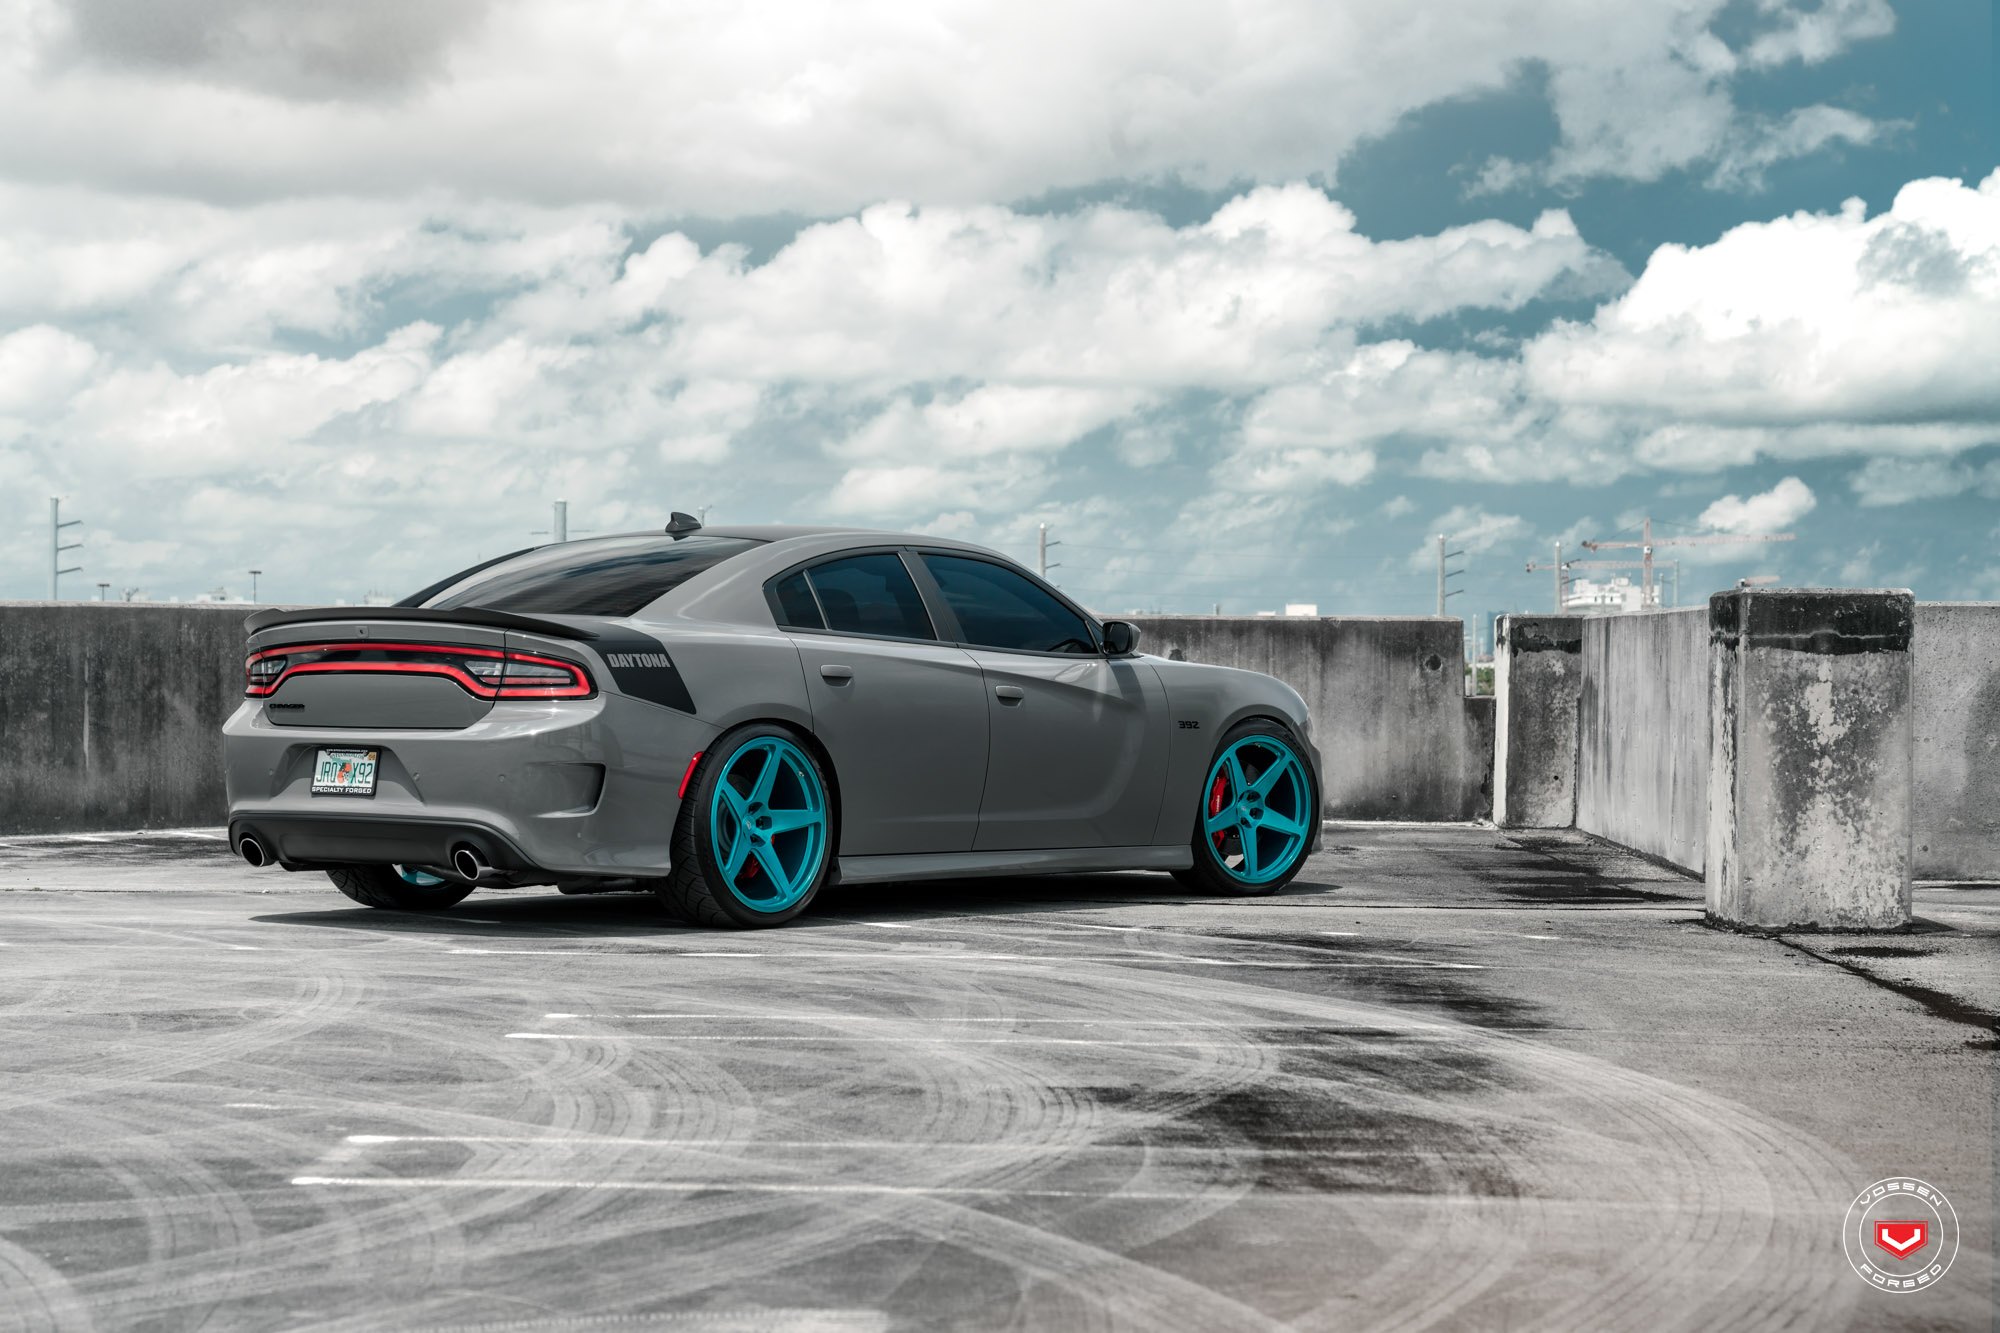 Aftermarket Rear Diffuser on Gray Dodge Charger Daytona - Photo by Vossen